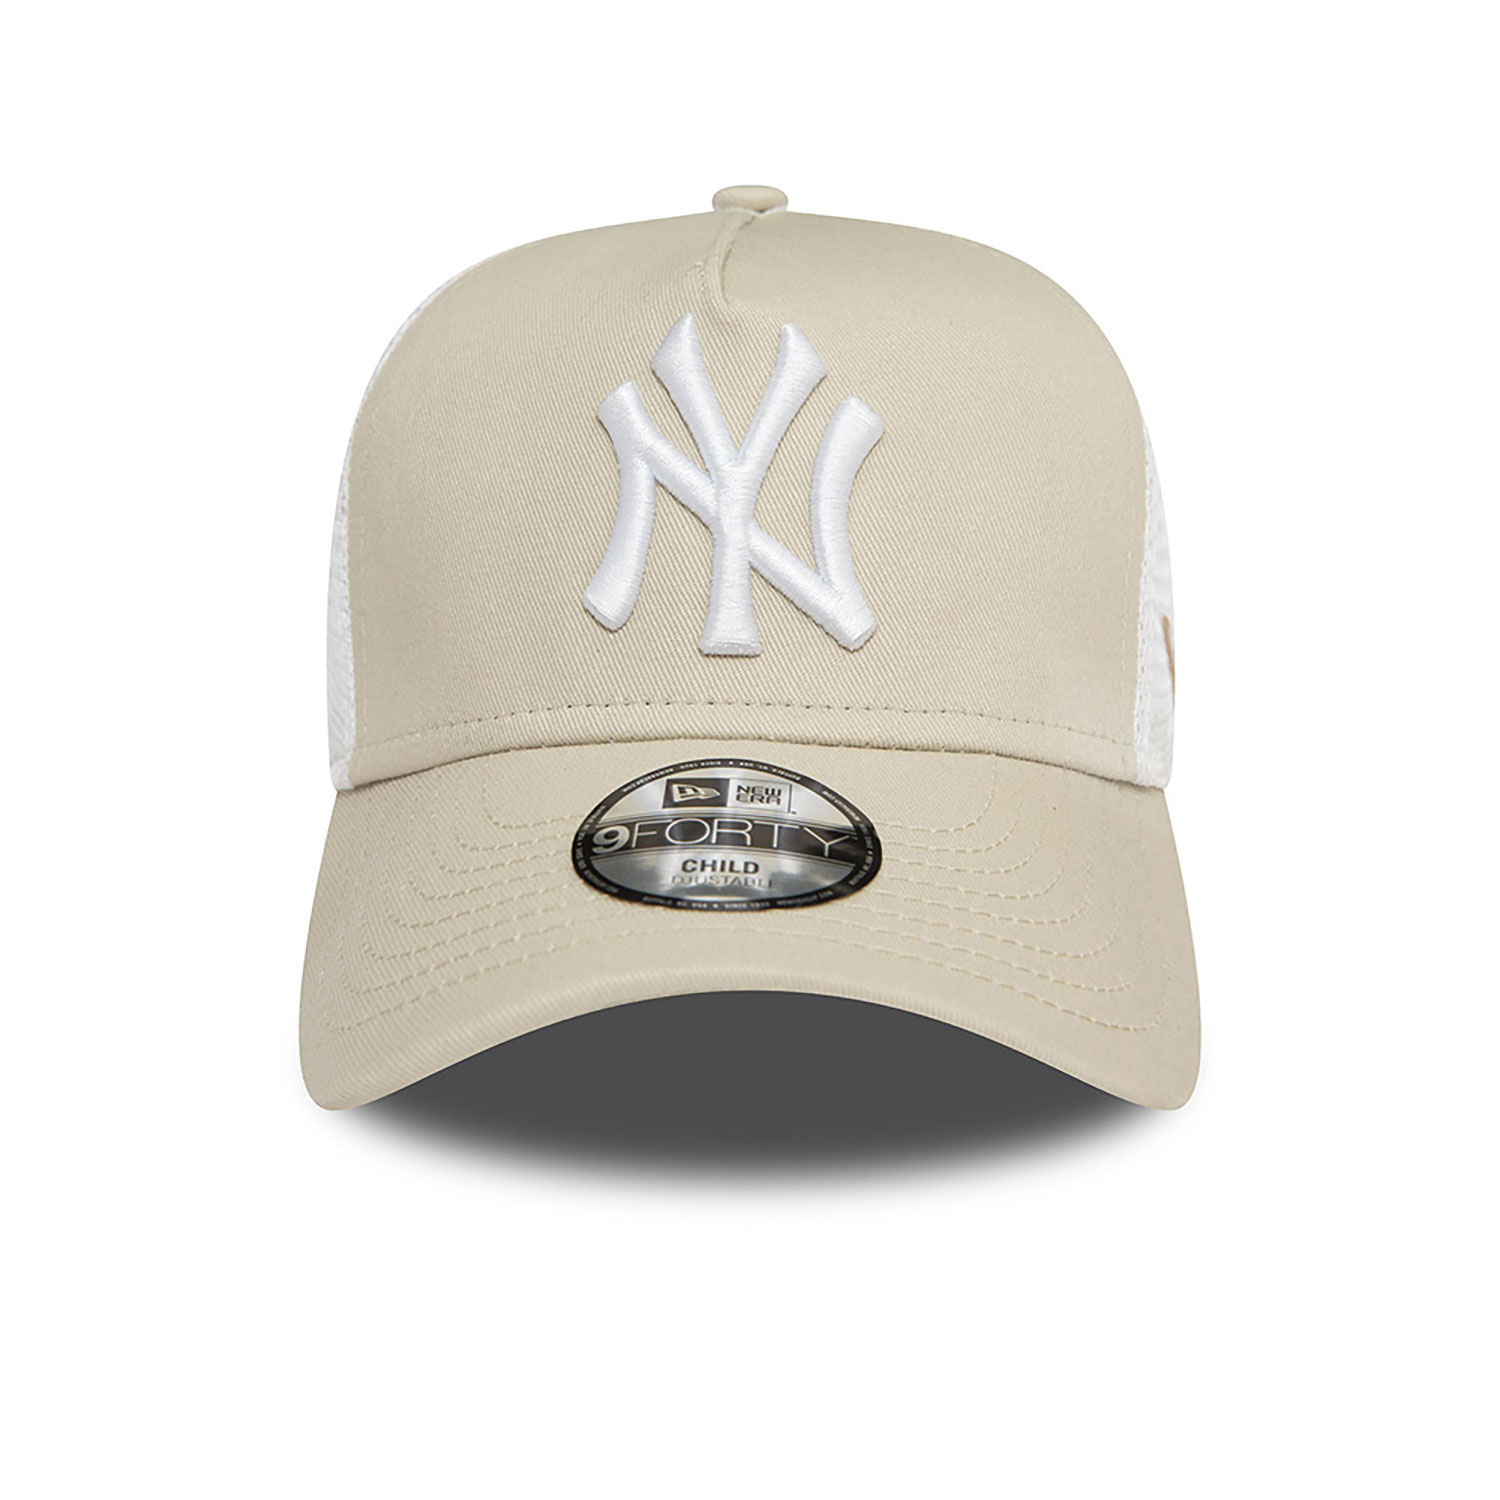 New York Yankees Youth League Essential Stone A-Frame Trucker Cap